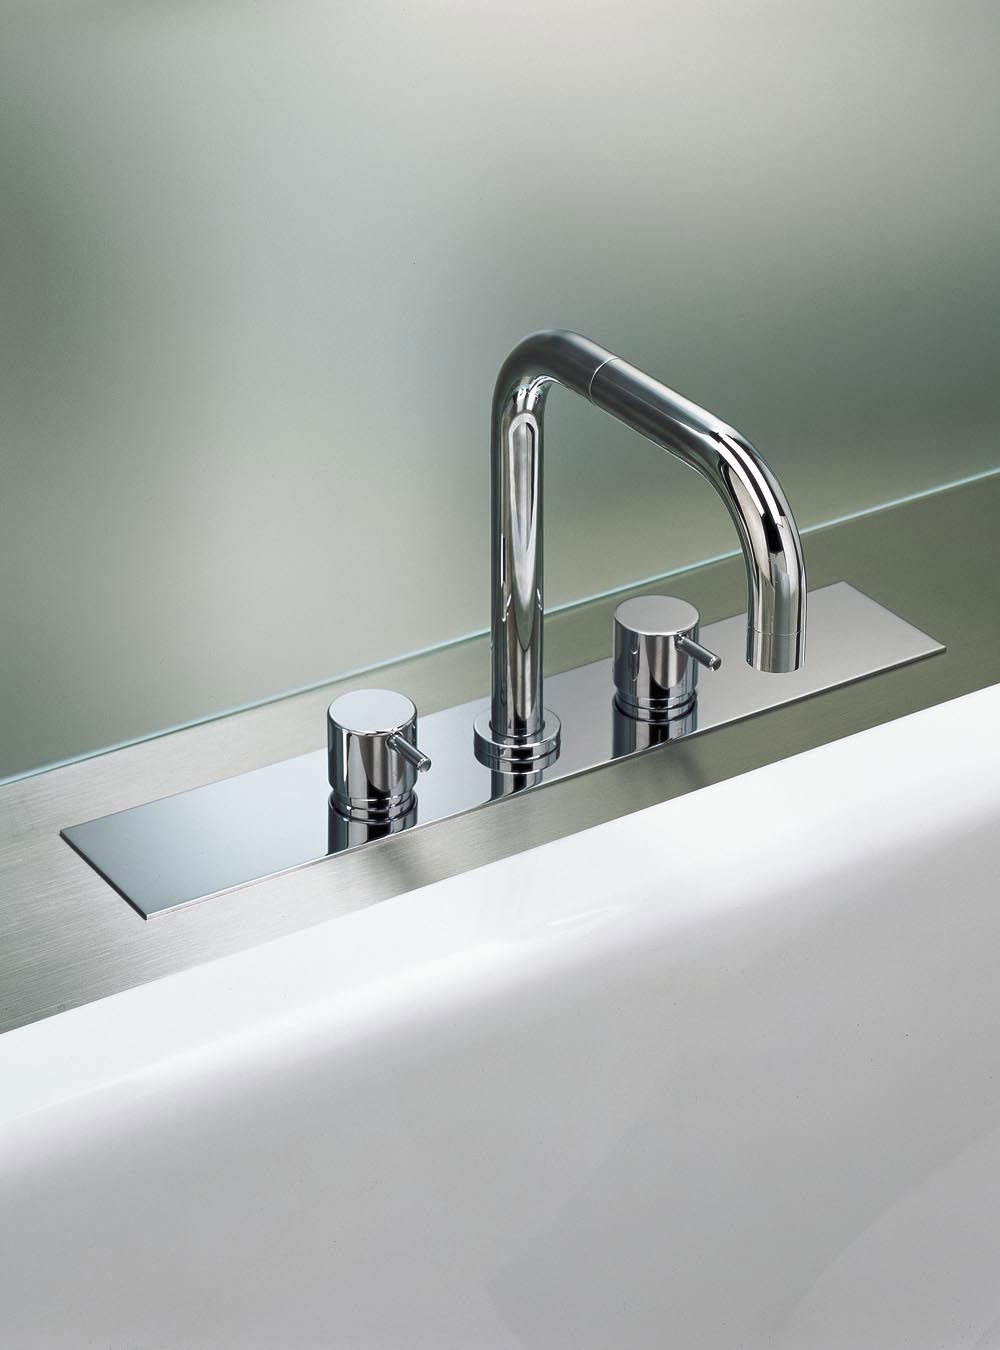 BK6: Two-handle mixer  with double swivel spout for bath filling. Complete with adjustable bracket and wa